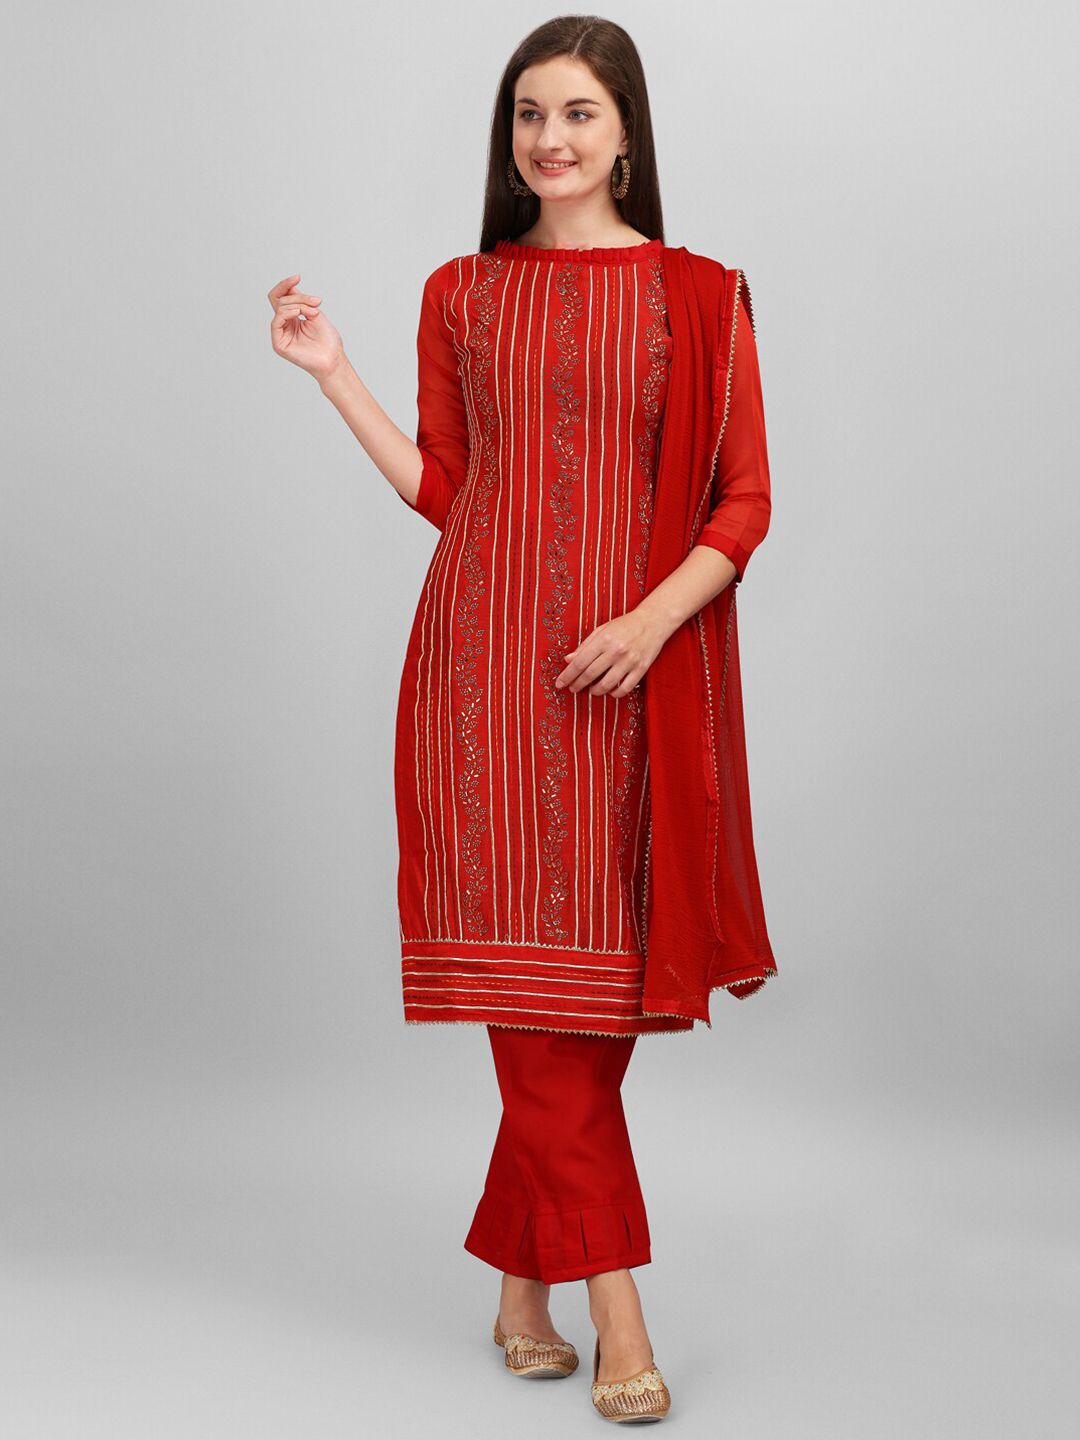 mf Women Red & White Embellished Unstitched Dress Material Price in India